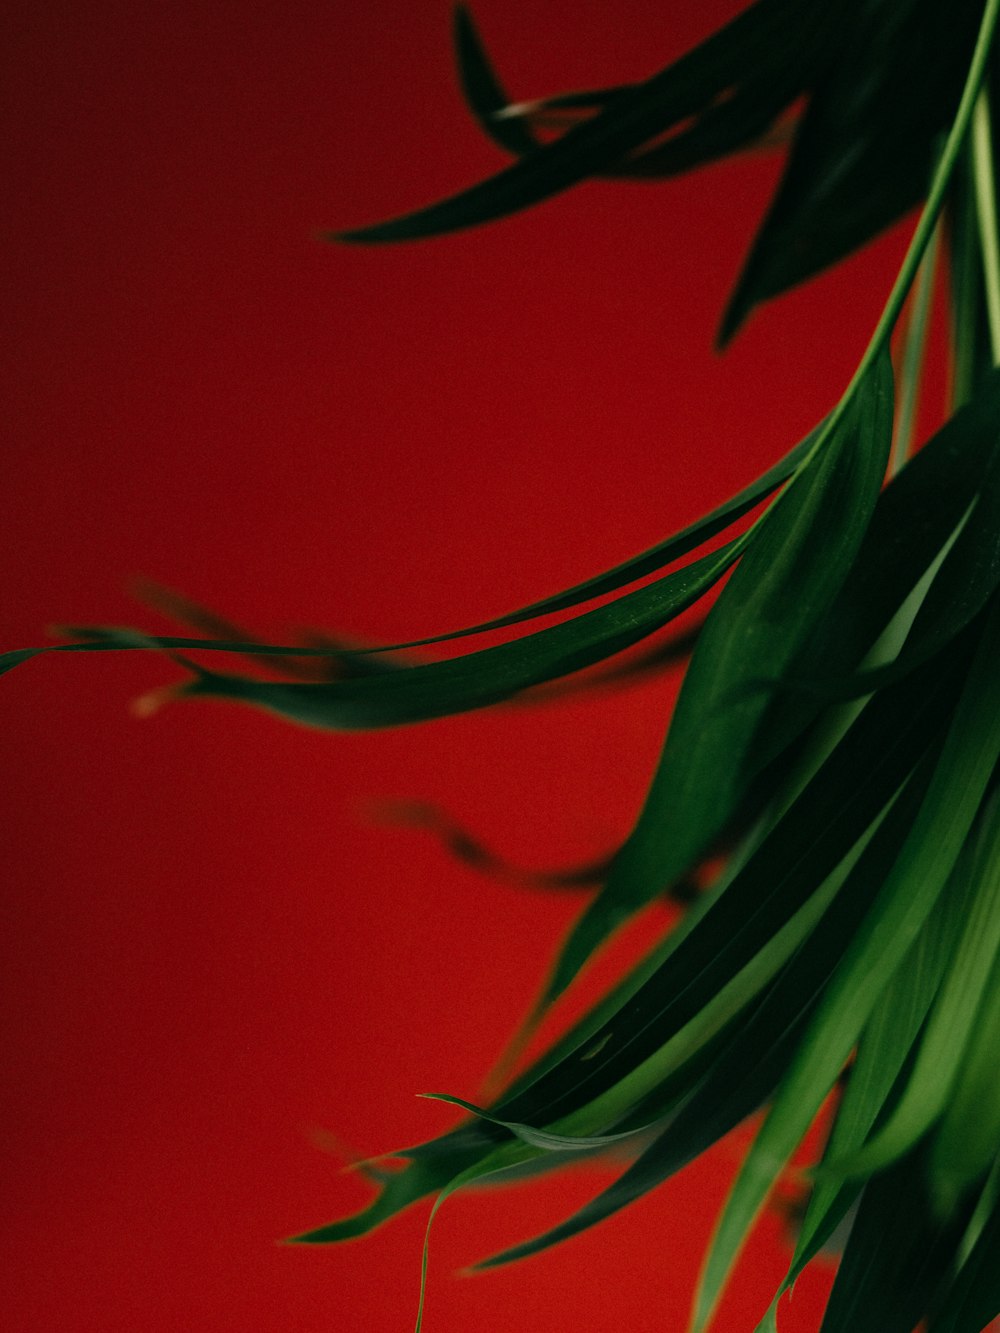 green plant on red background